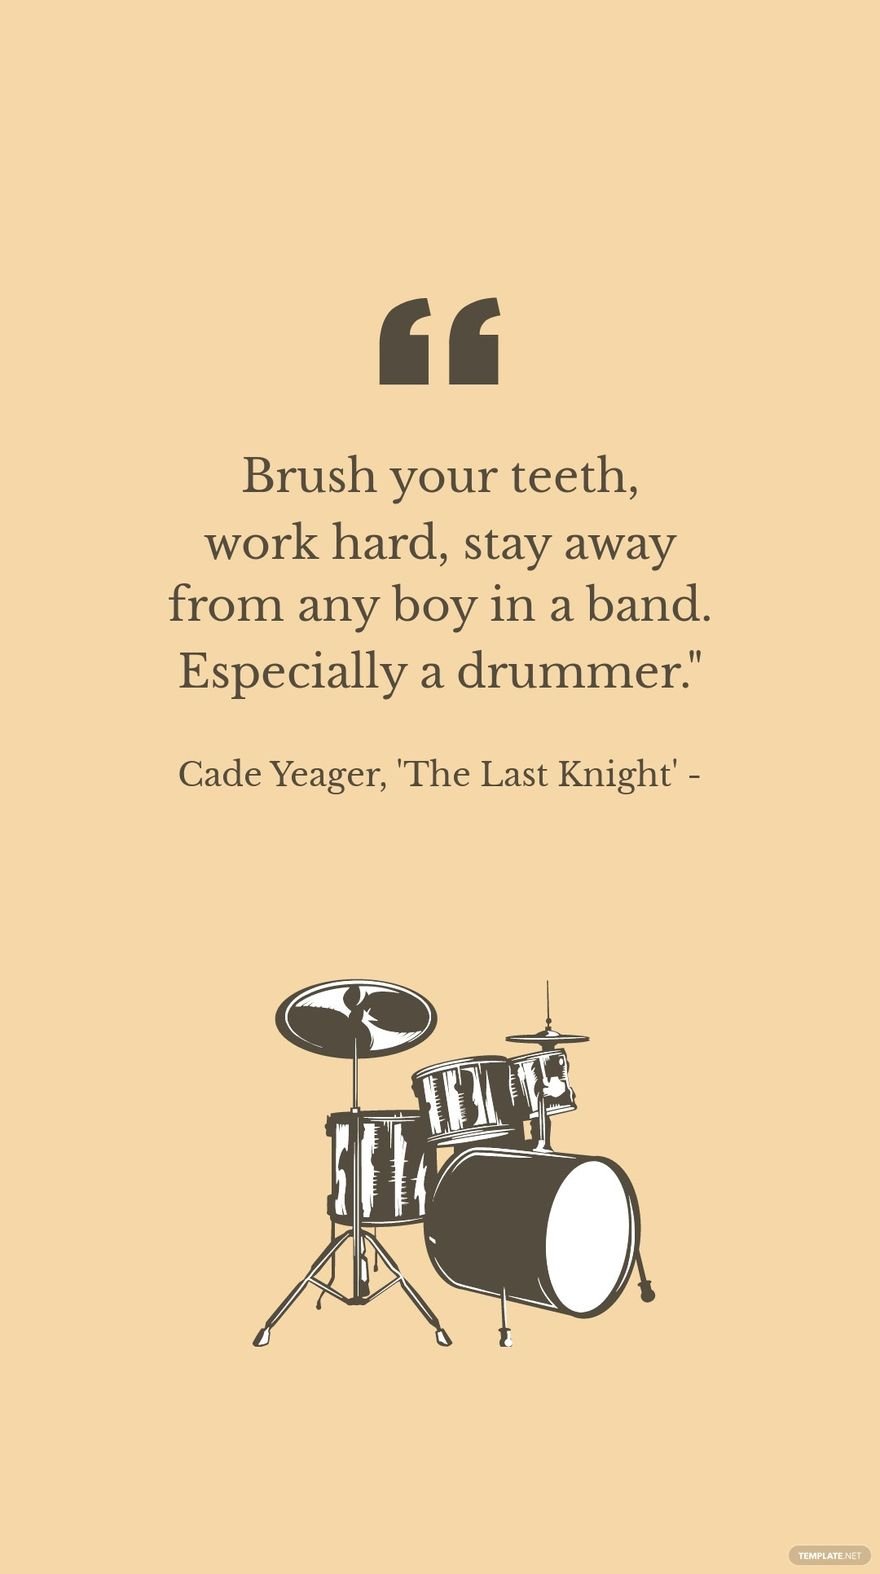  Free Cade Yeager, 'The Last Knight' - Brush your teeth, work hard, stay away from any boy in a band. Especially a drummer.